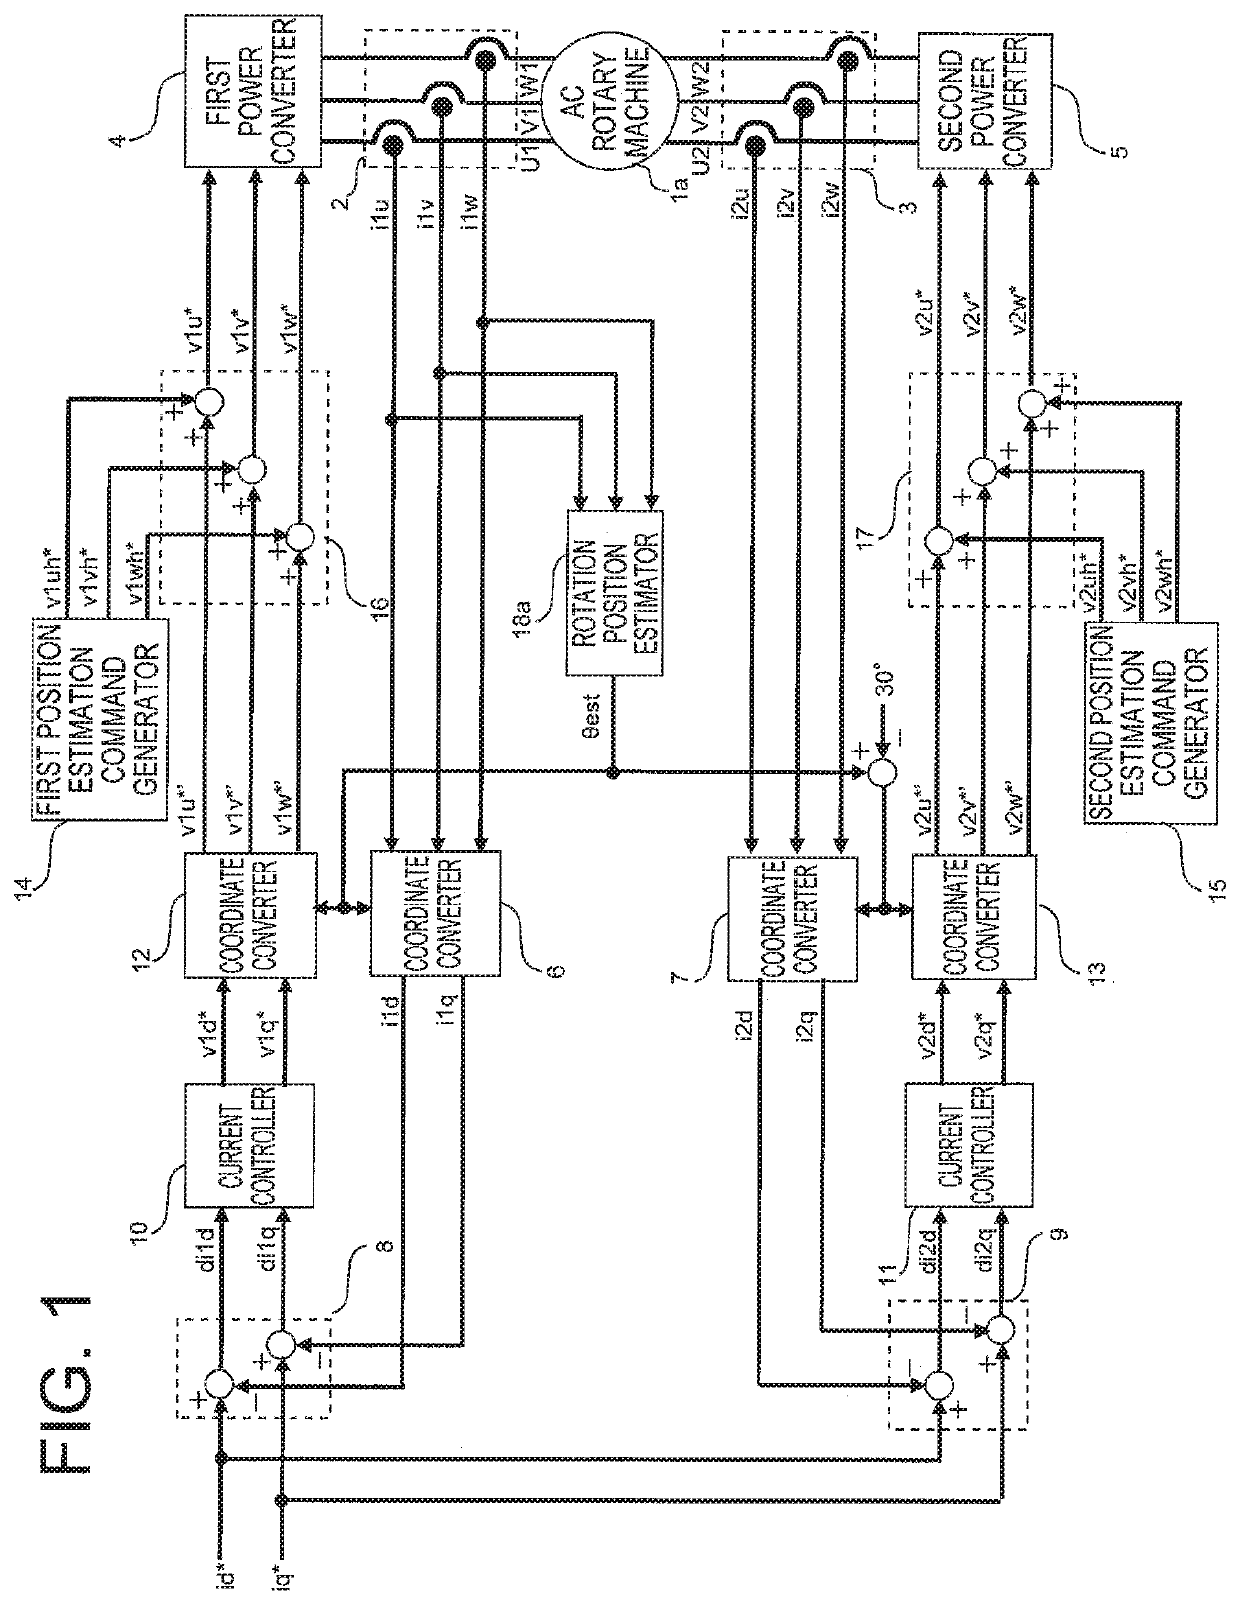 Device for controlling AC rotary machine and device for controlling electric power steering